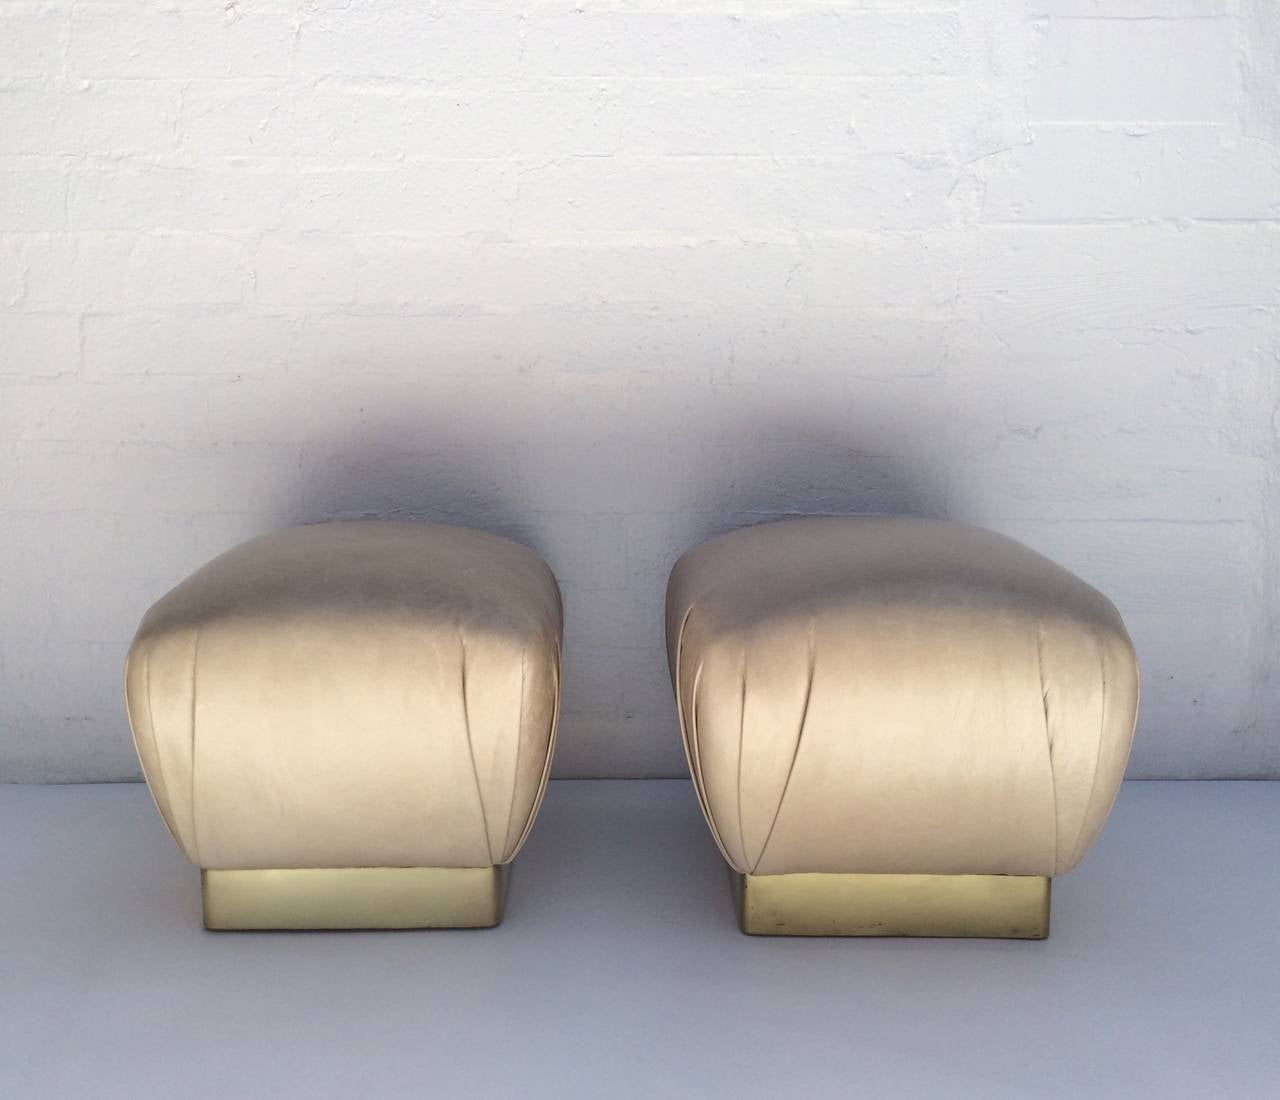 American Pair of Leather and Brass Poufs Designed by Marge Carson